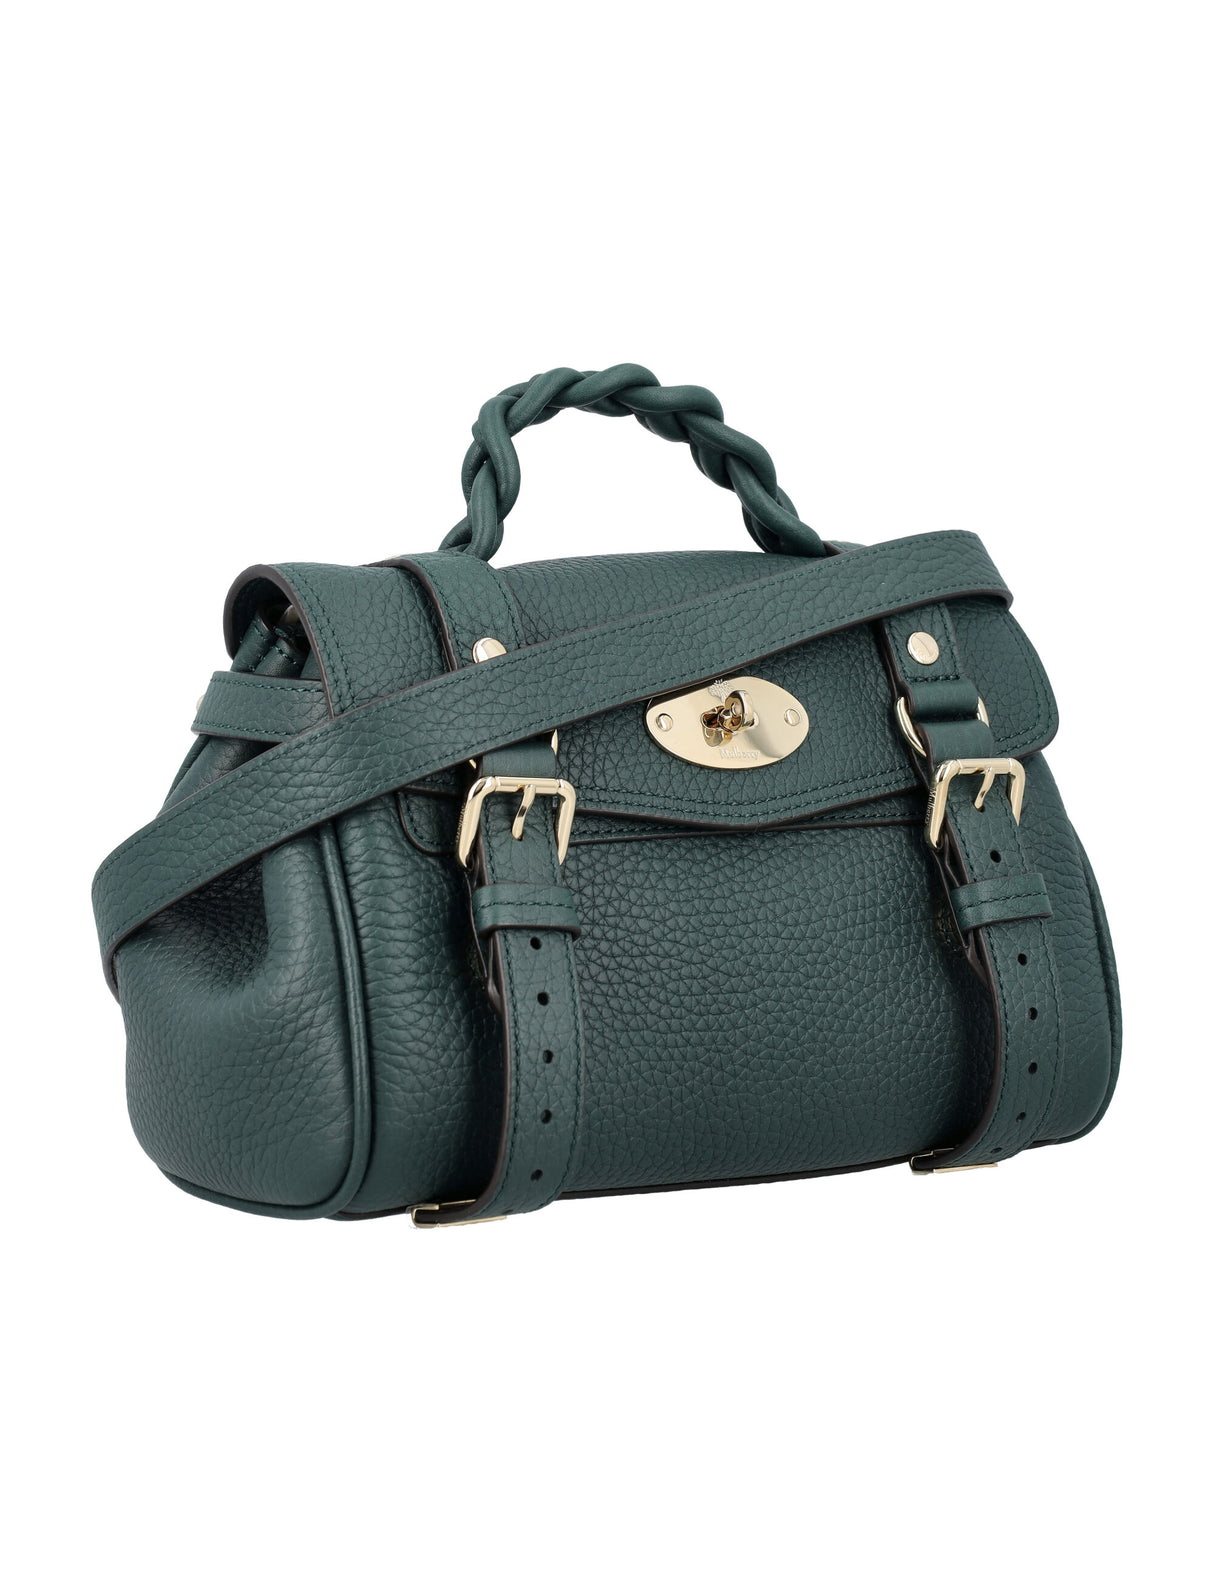 Mulberry Mulberry Green Leather Mini Shoulder Handbag with Postman's Lock Closure and Braided Top Handle